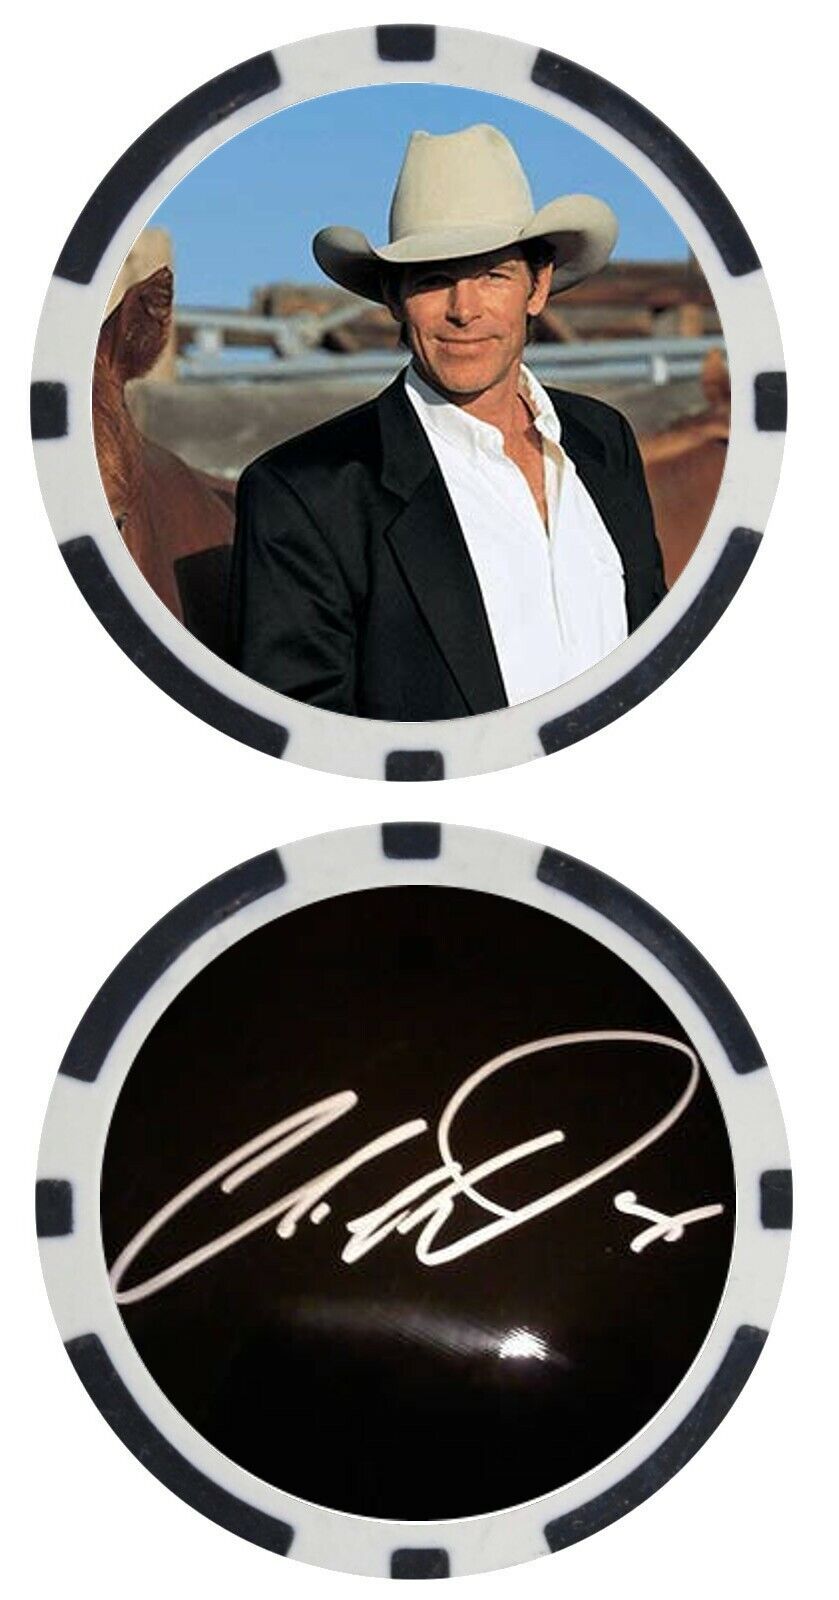 CHRIS LEDOUX - COUNTRY STAR - POKER CHIP - ***SIGNED/AUTO***